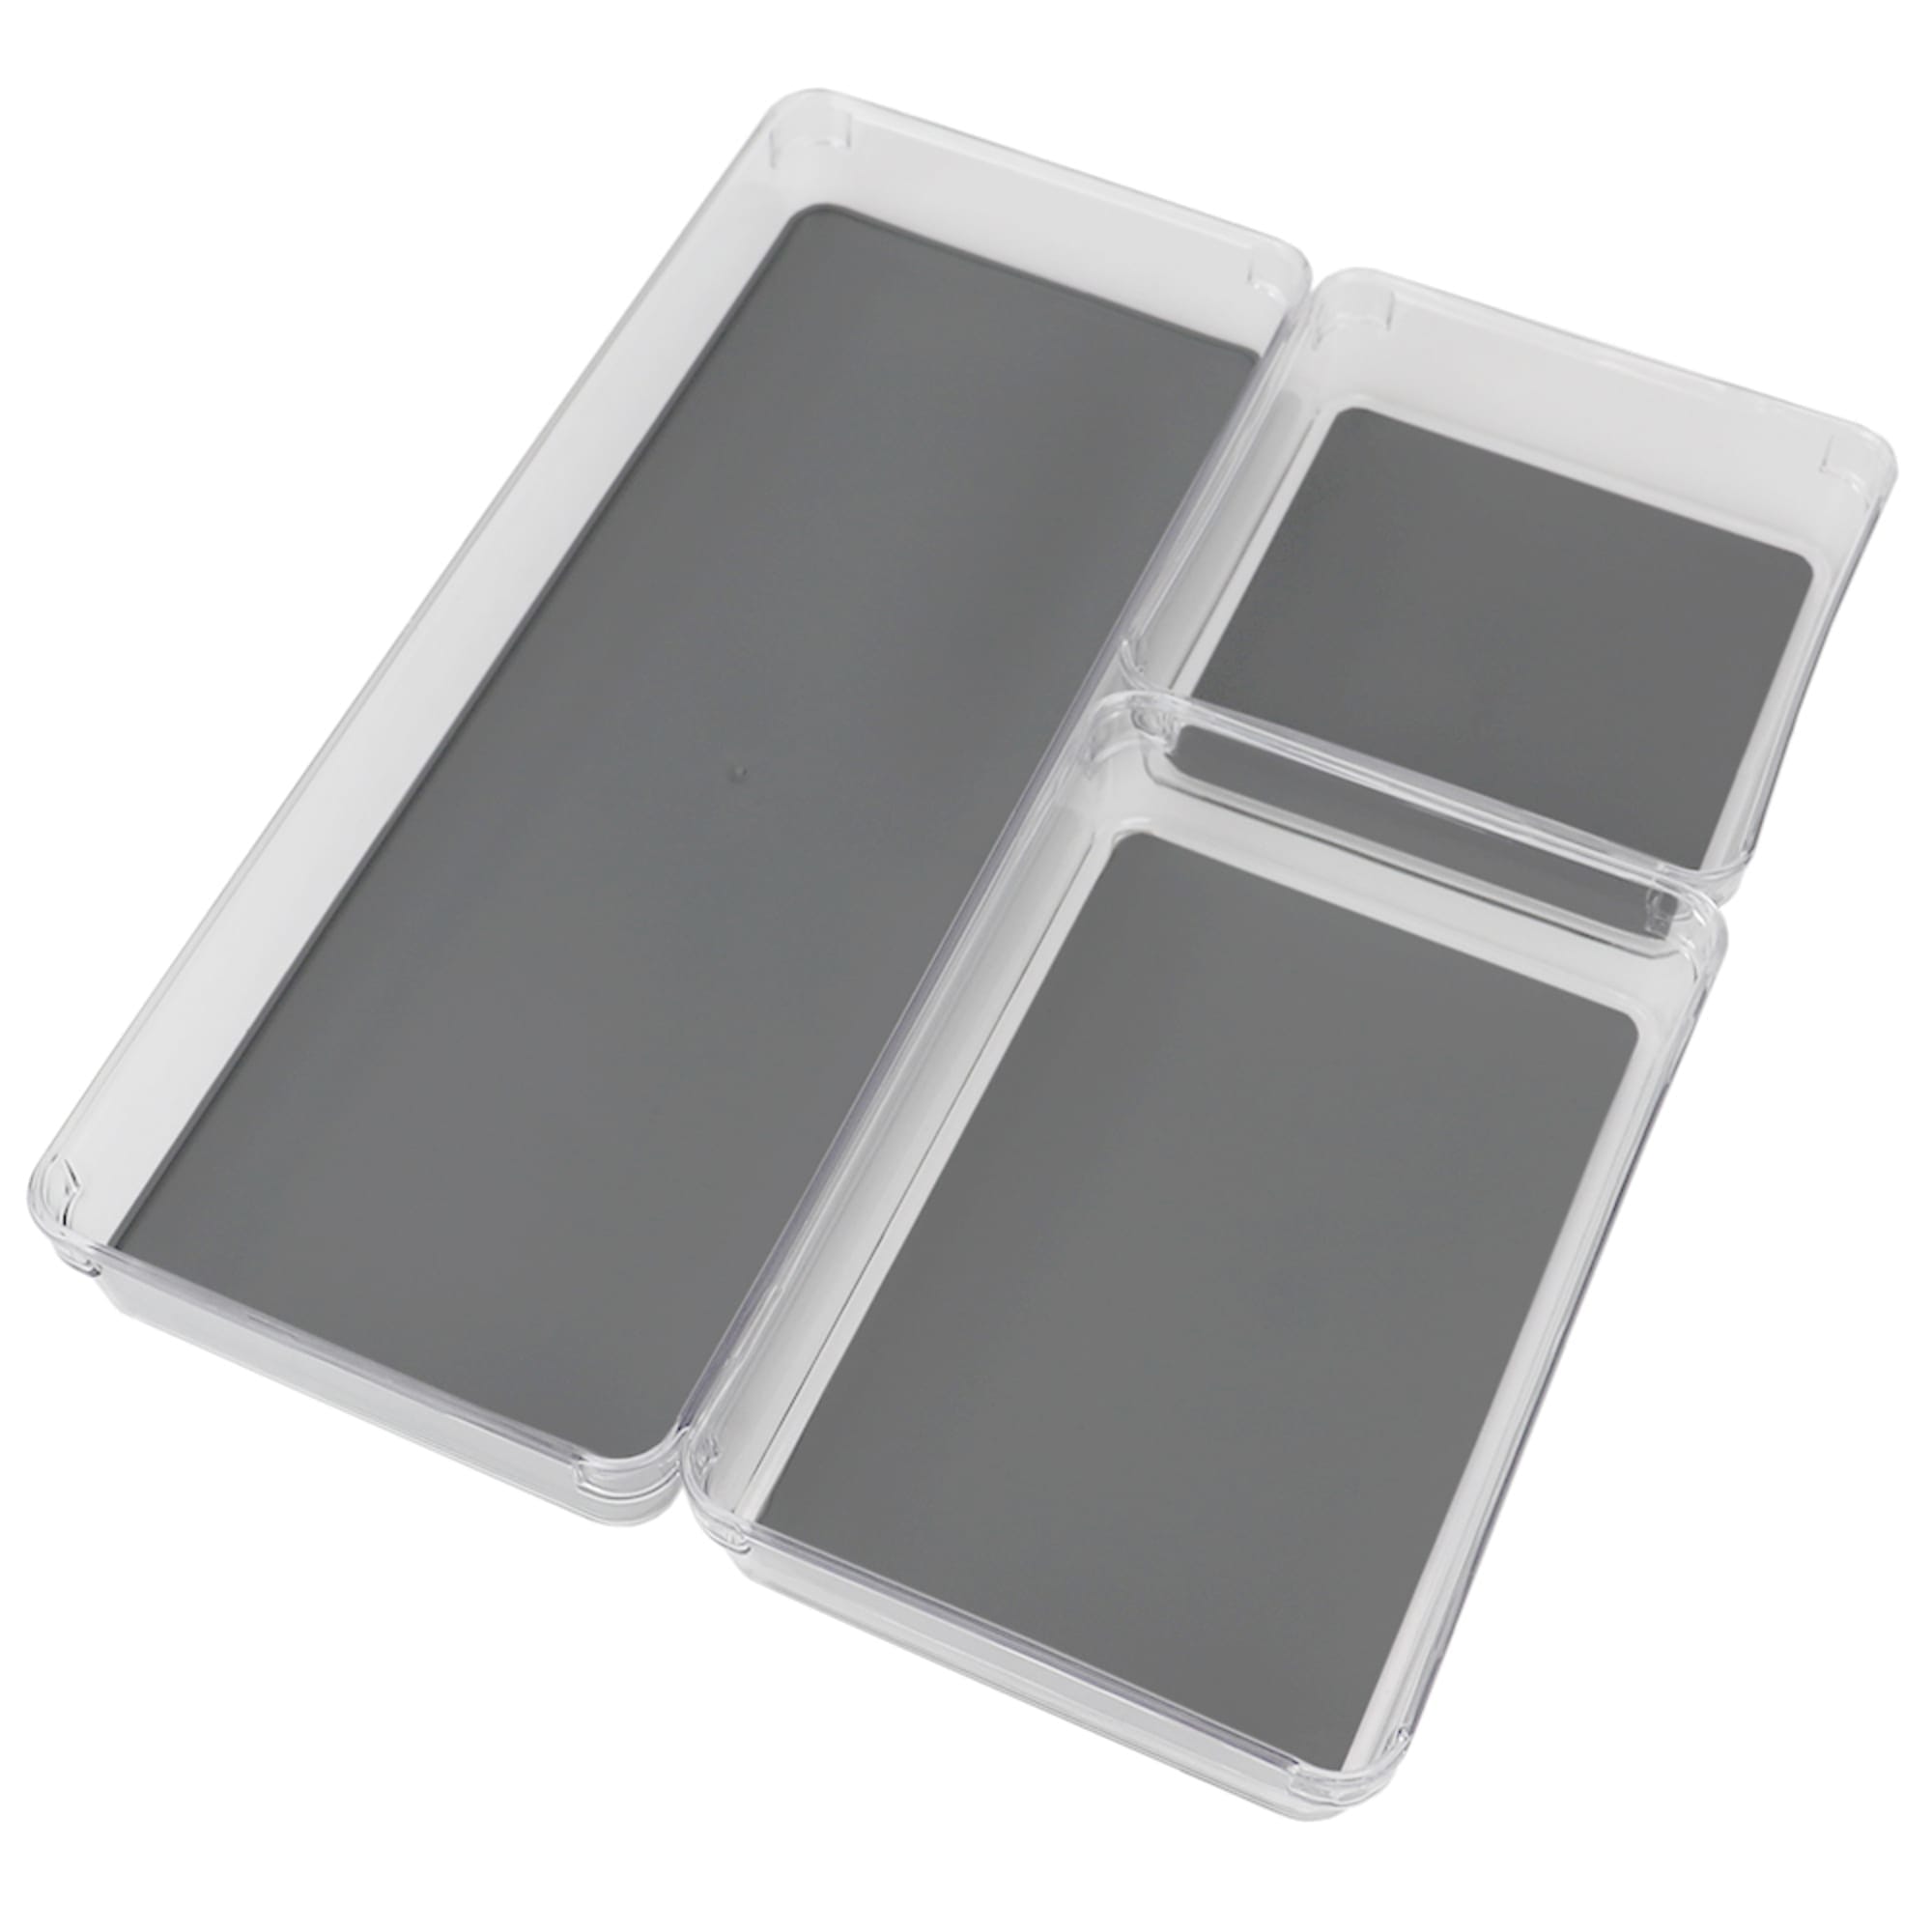 Home Basics 3 Compartment Rubber Lined Plastic Drawer Organizer, (Set of 3), Grey $8.00 EACH, CASE PACK OF 6